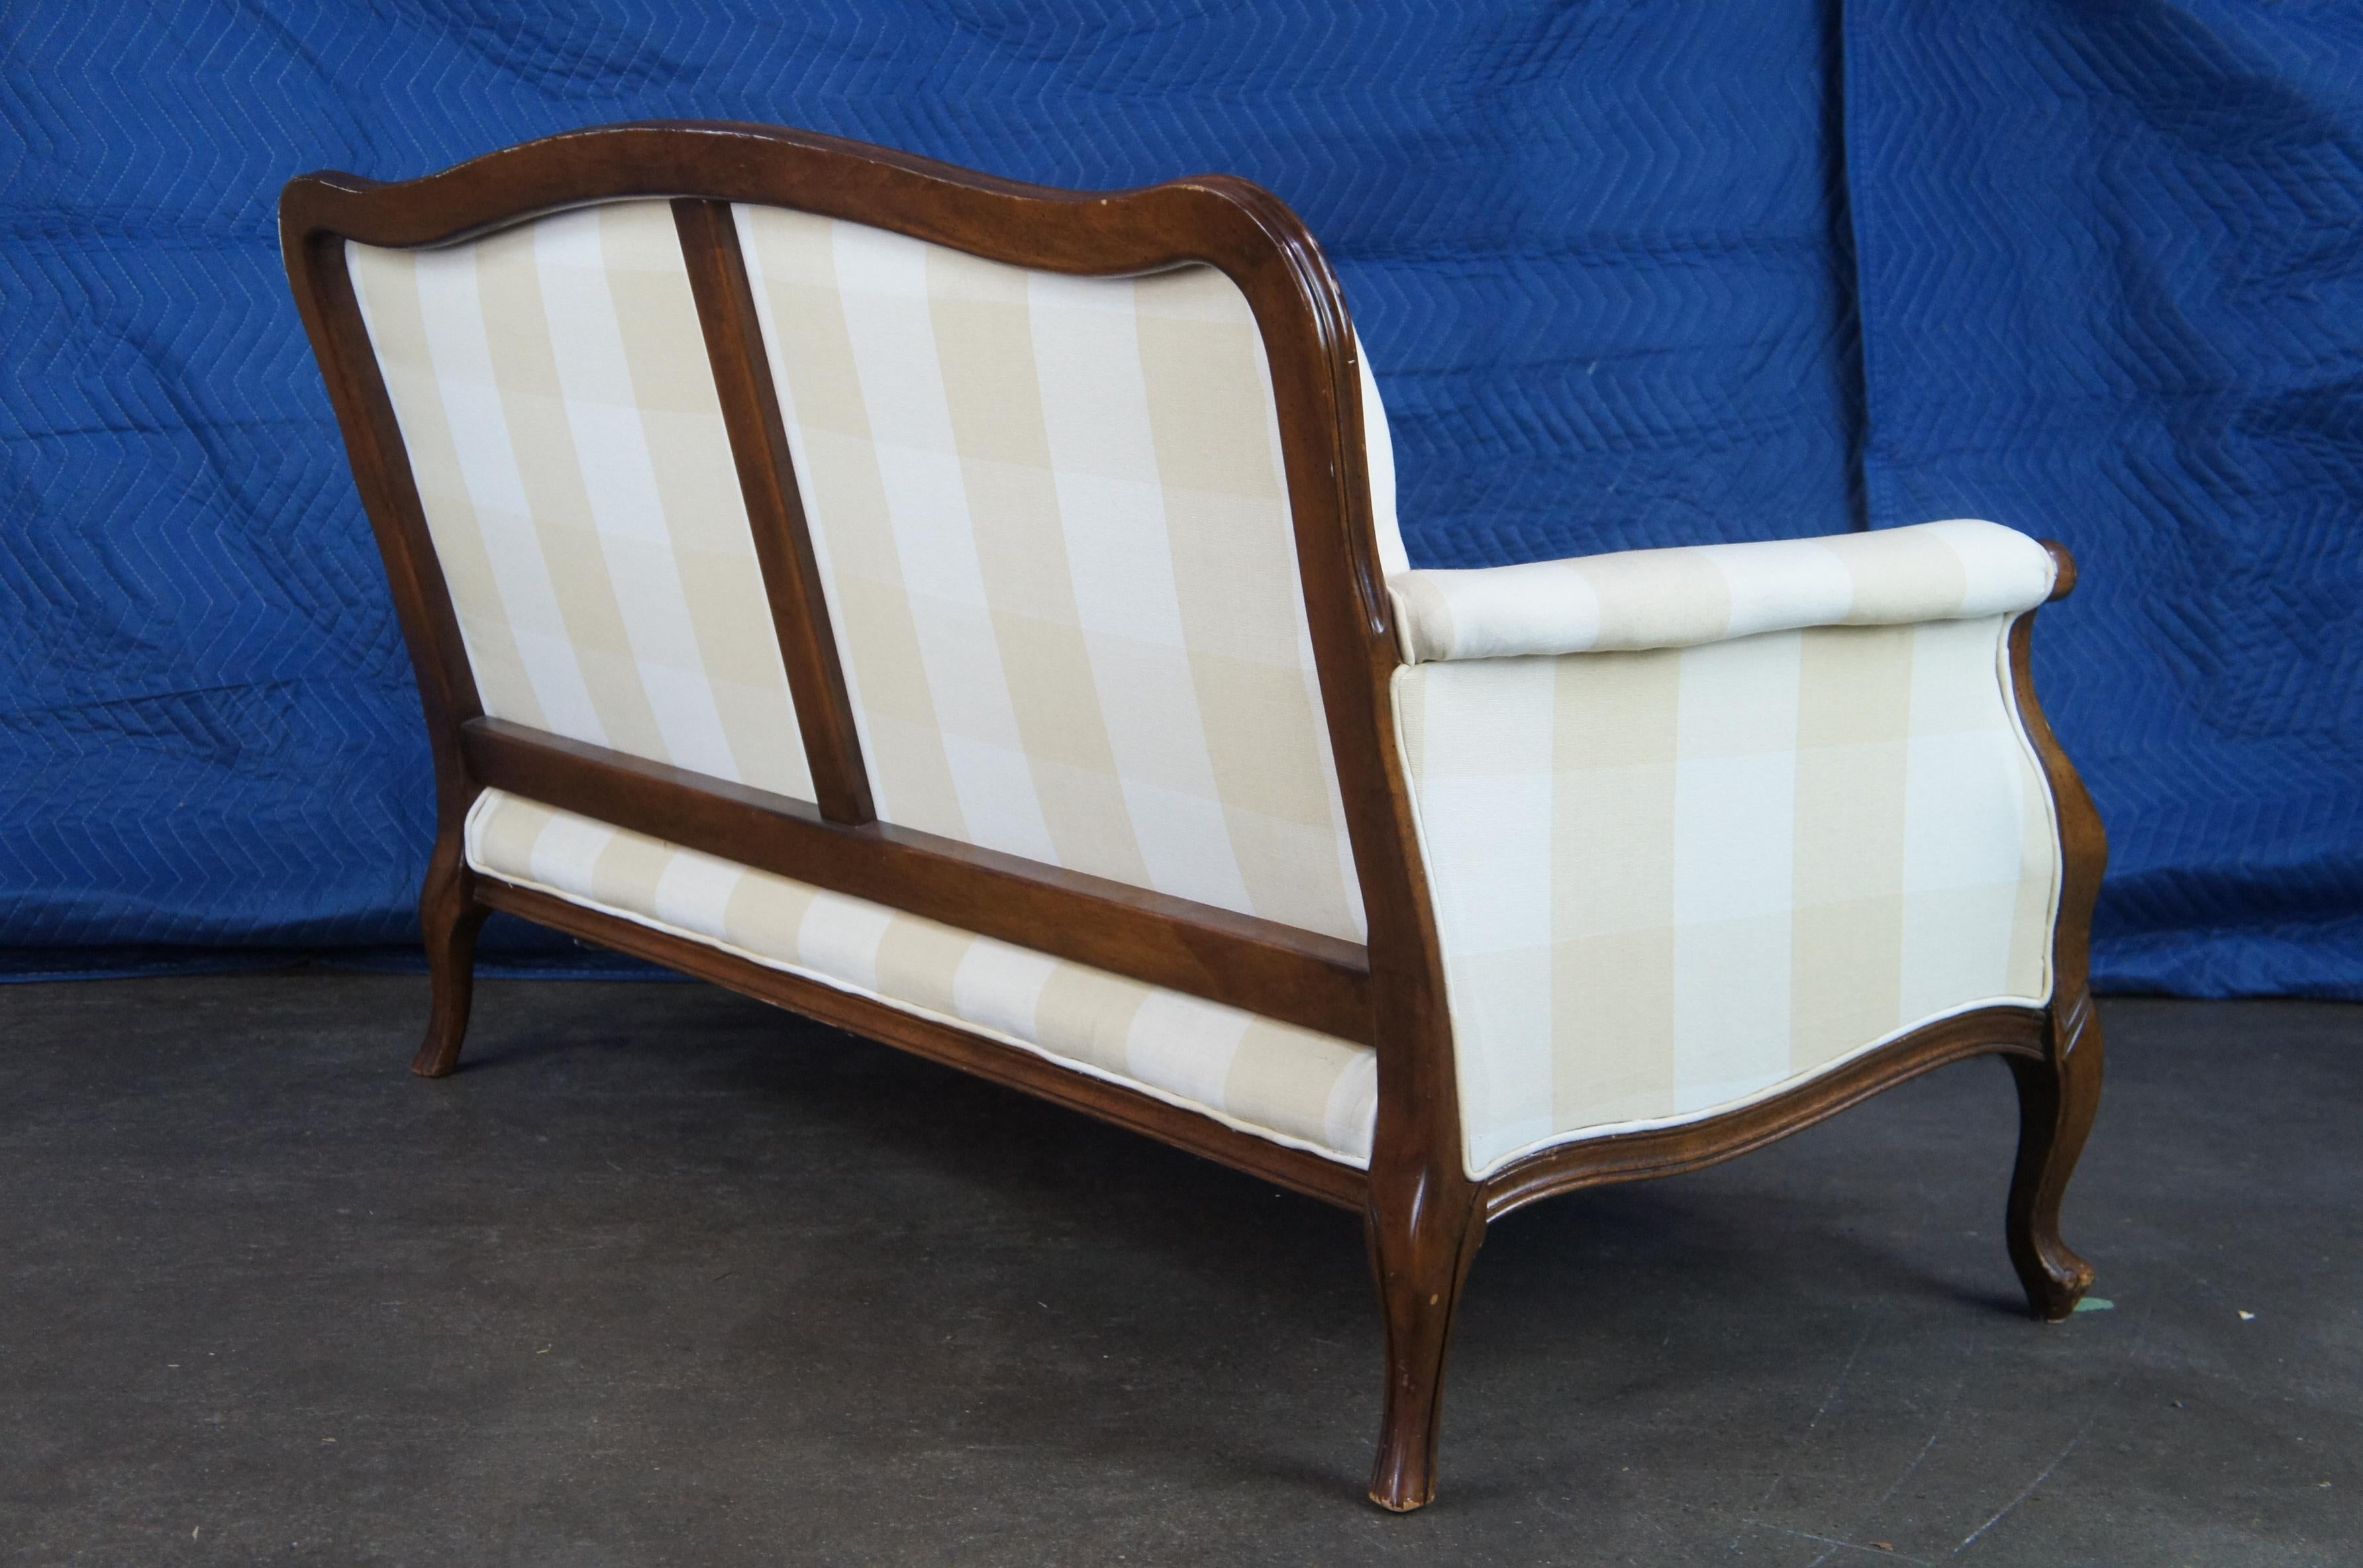 French Provincial Antique French Country Walnut Plaid Serpentine Camelback Settee Love Seat